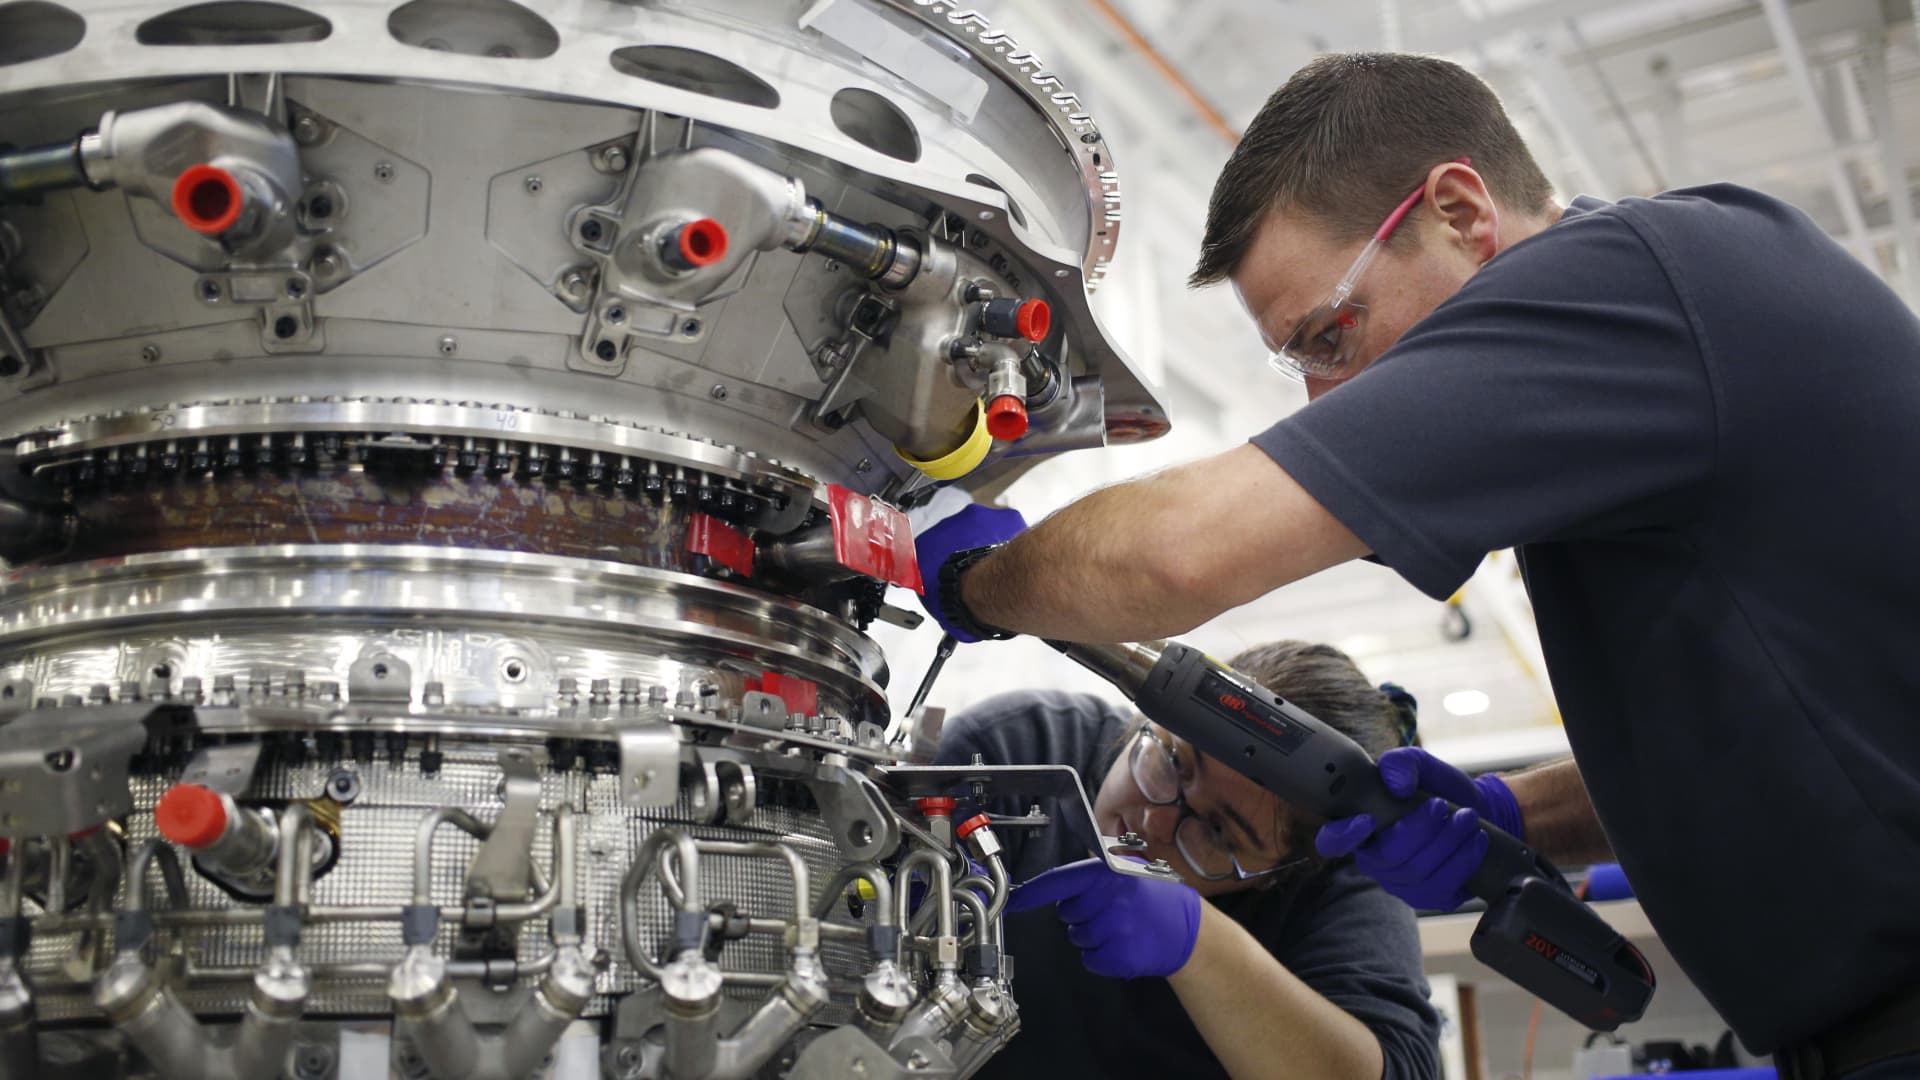 Employees use hand tools to assemble components of a LEAP jet engine at the General Electric Aviation plant in Lafayette, Indiana, July 19, 2019.